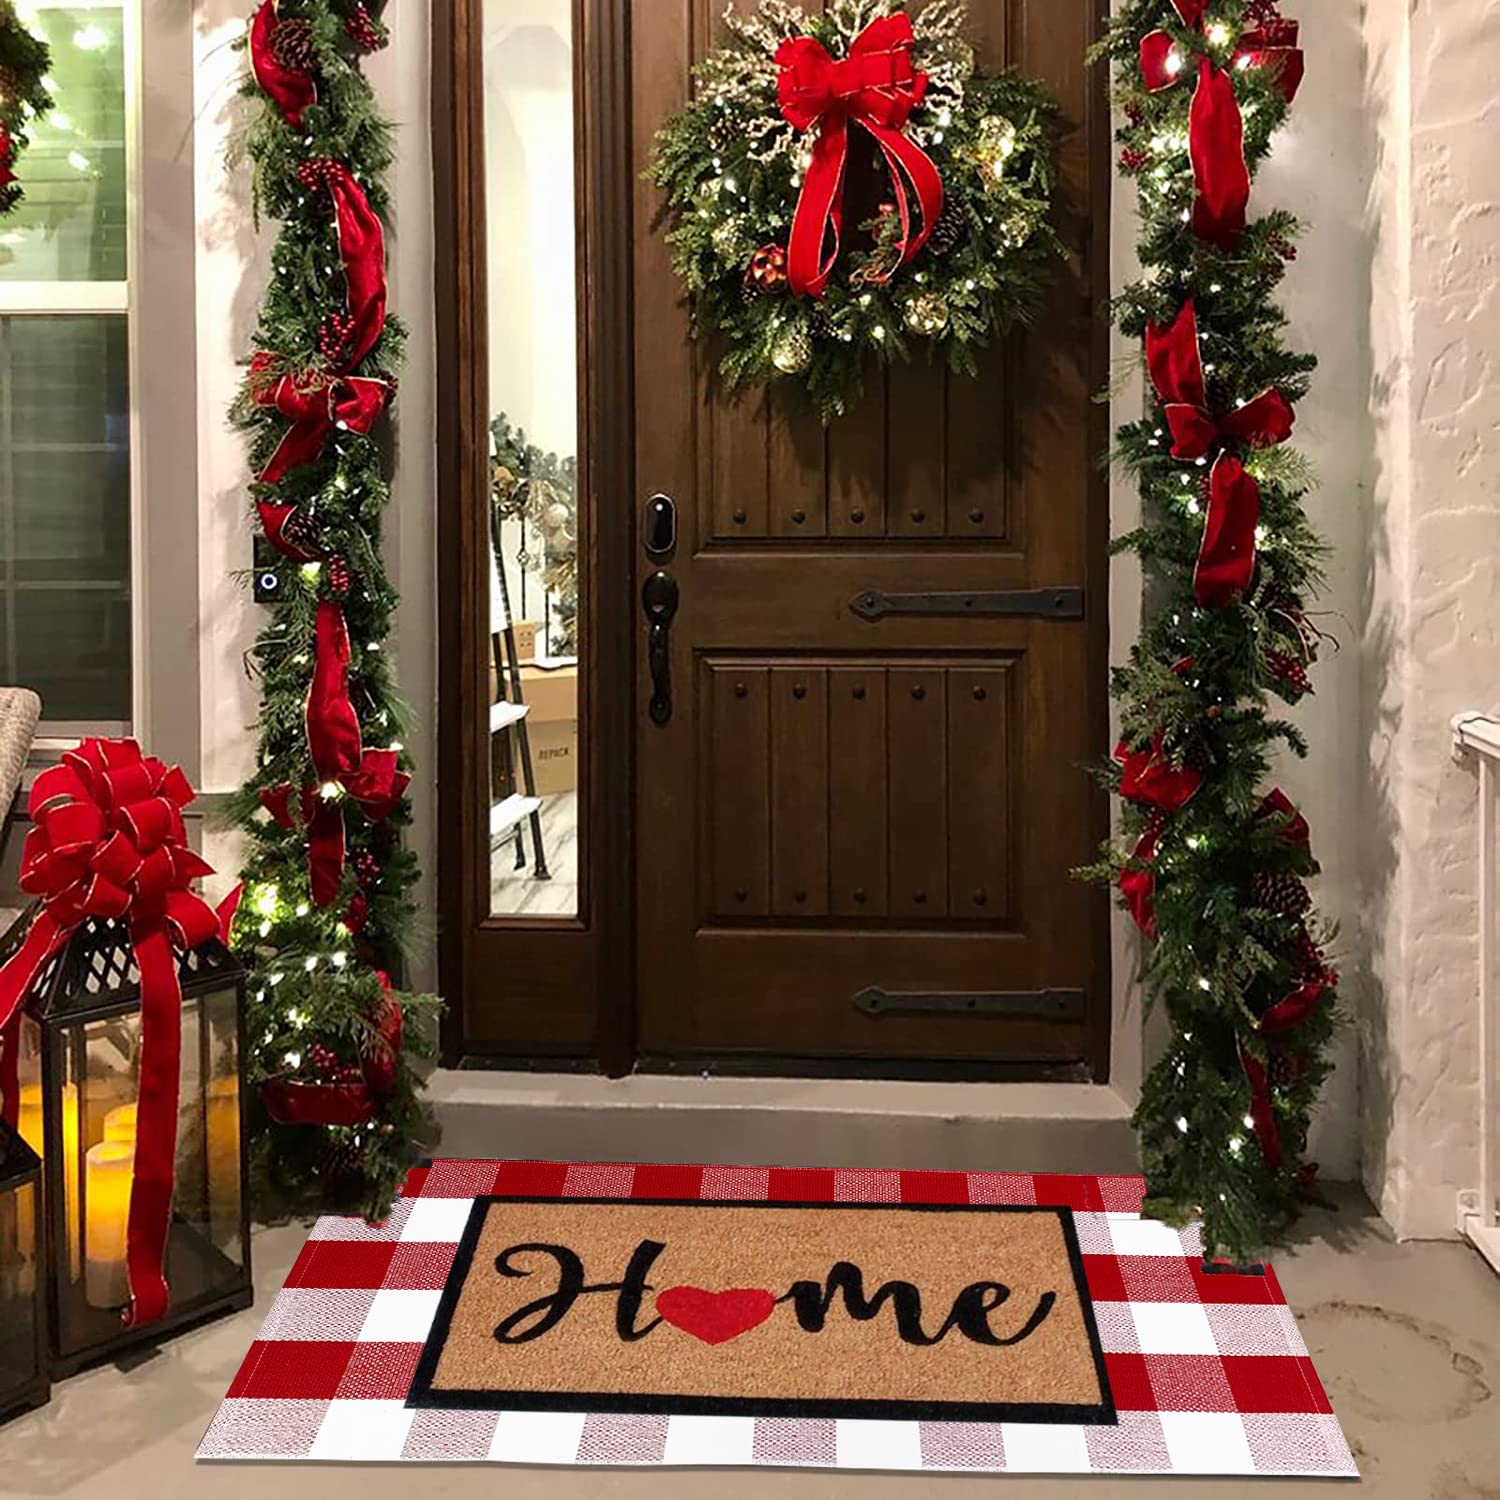 USTIDE Cotton Buffalo Plaid Rug Red&White Check Rugs 23.6"X51" Hand-Woven Indoor or Outdoor Rugs for Layered Door Mats Washable Carpet for Front Porch/Kitchen/Farmhouse/Entryway